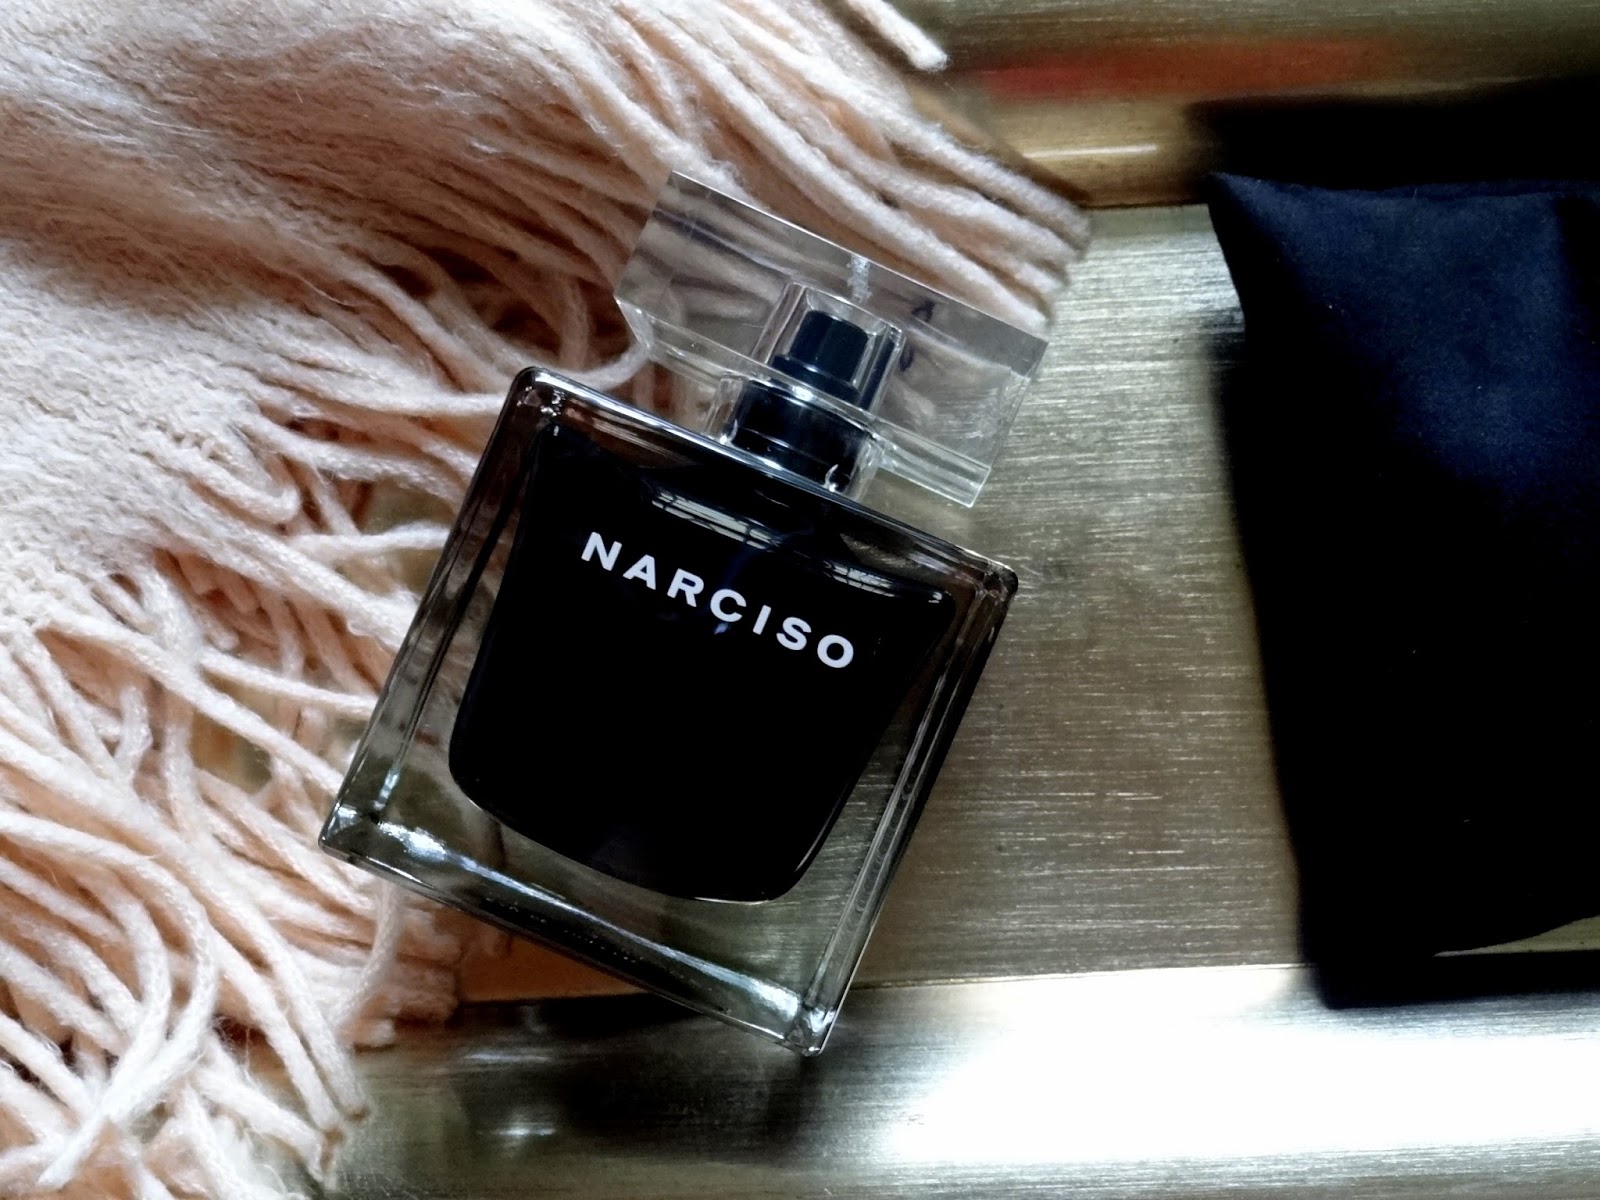 Makeup, Beauty and More: Narciso by Narciso Rodriguez Eau de Toilette